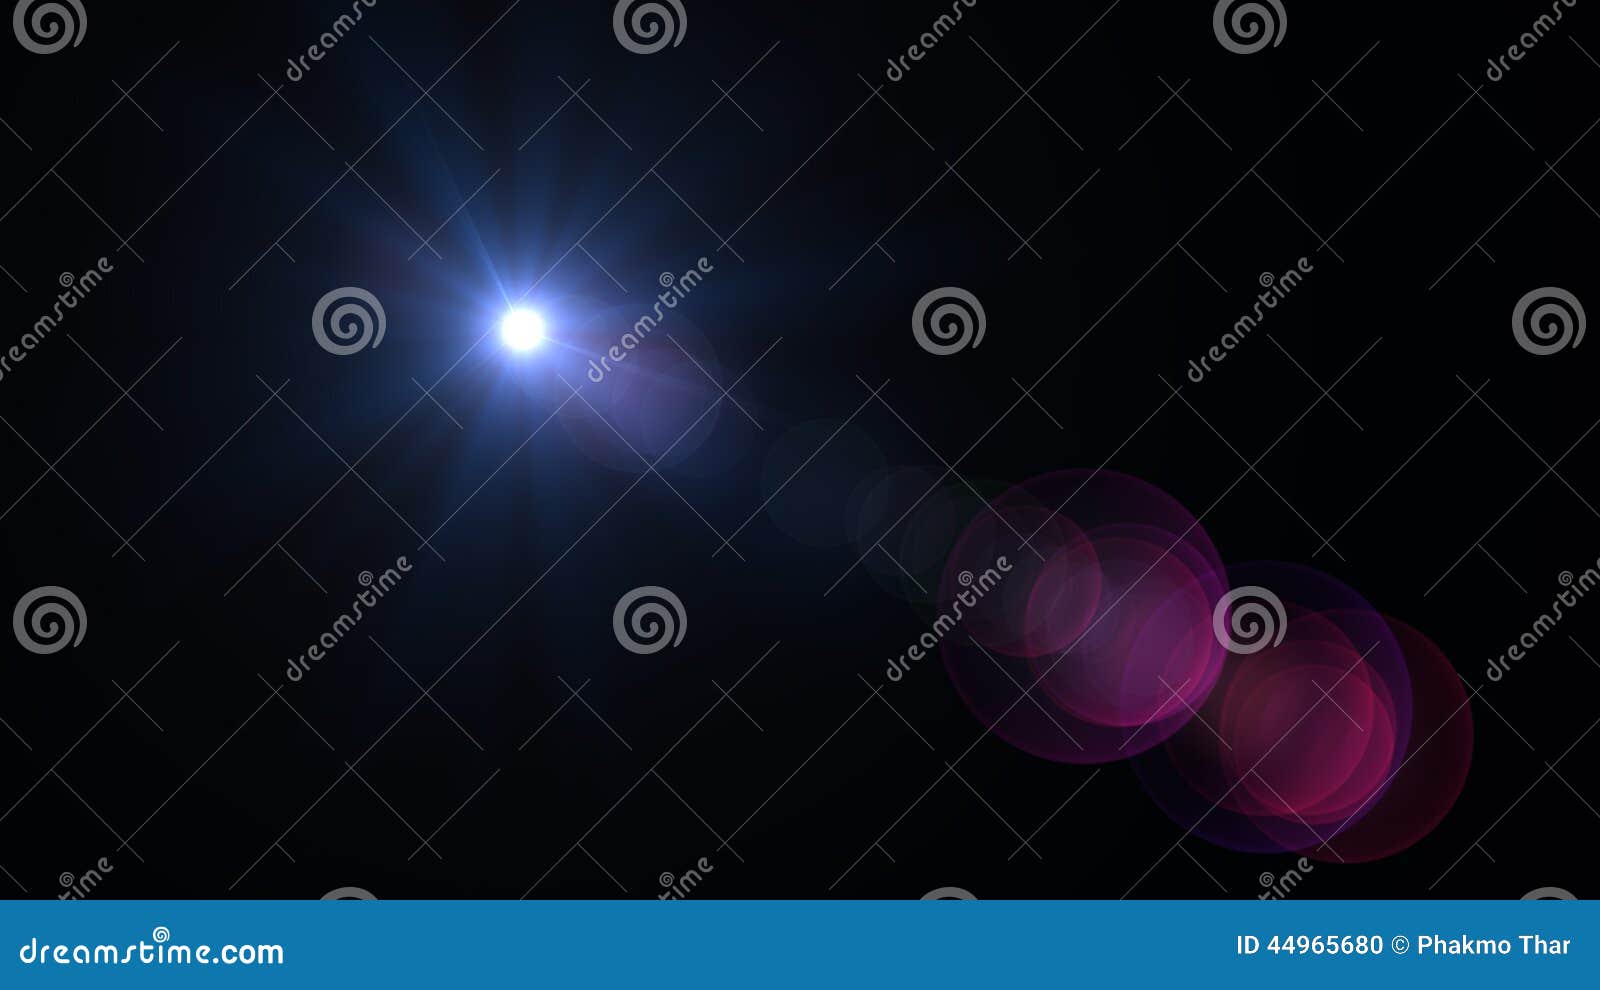 lens flare effects